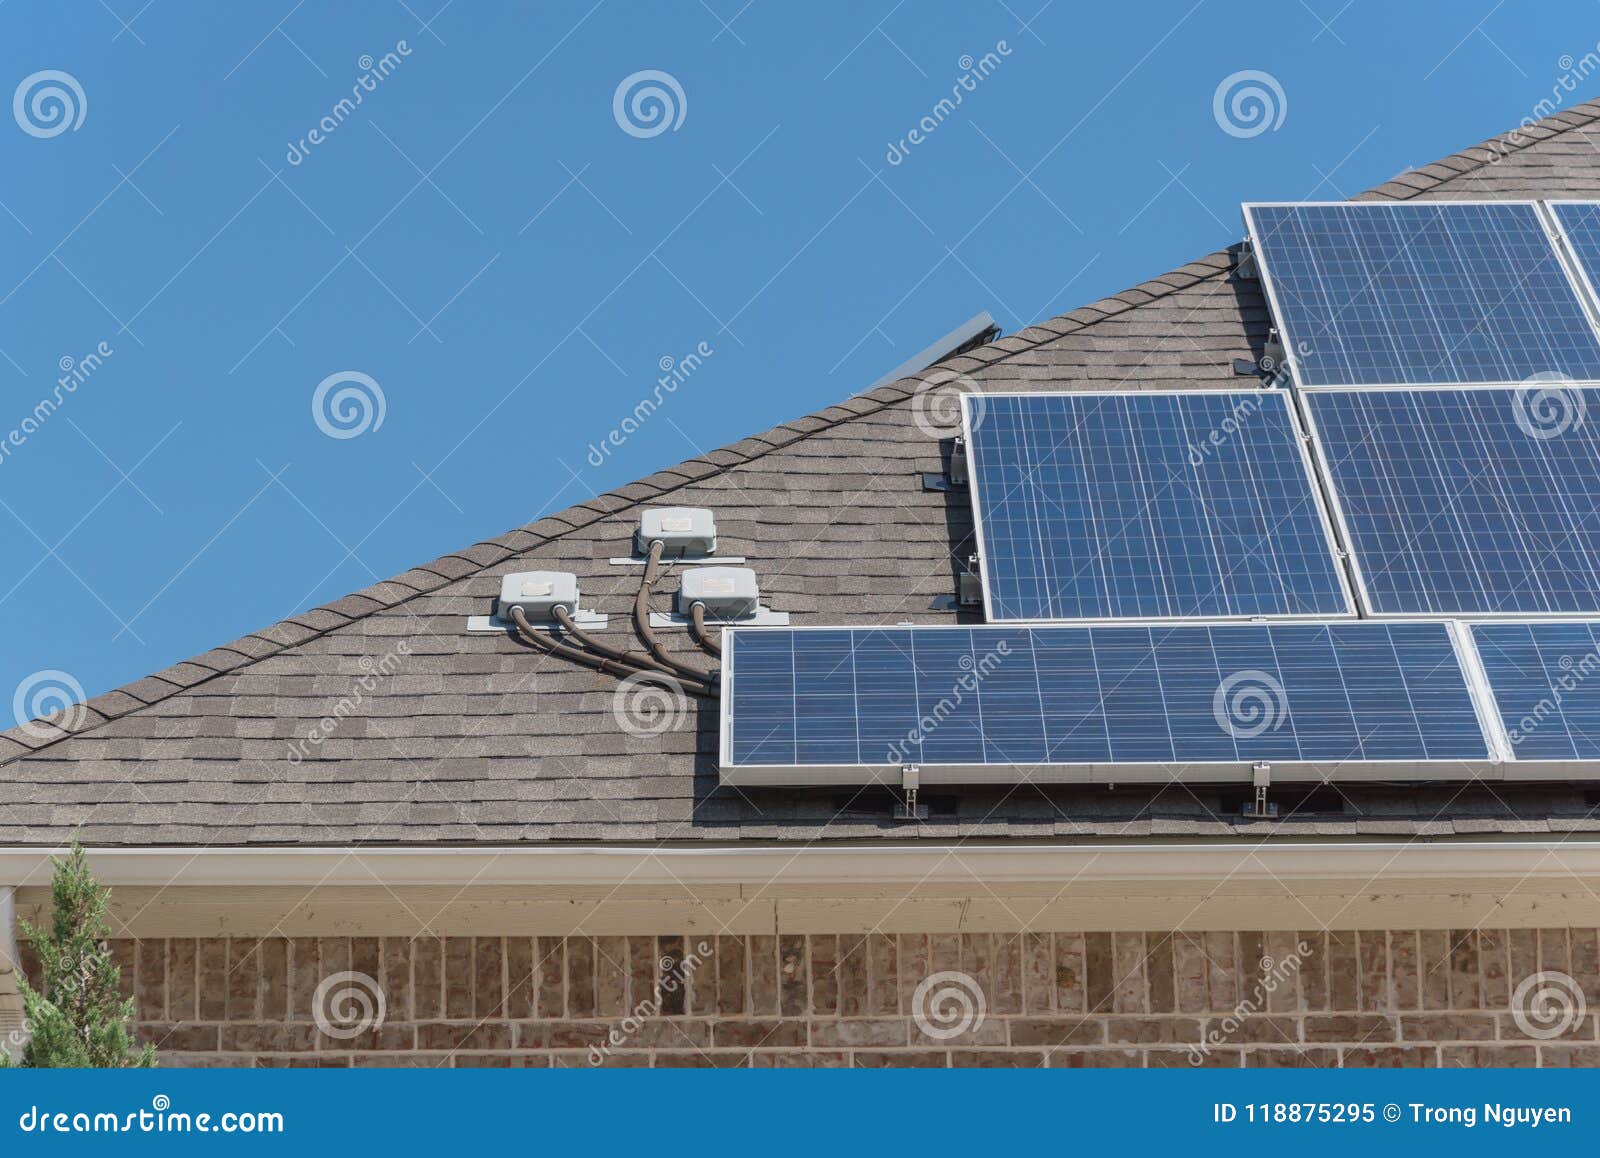 Close Up Rooftop Solar Panel System With Attic Junction Box